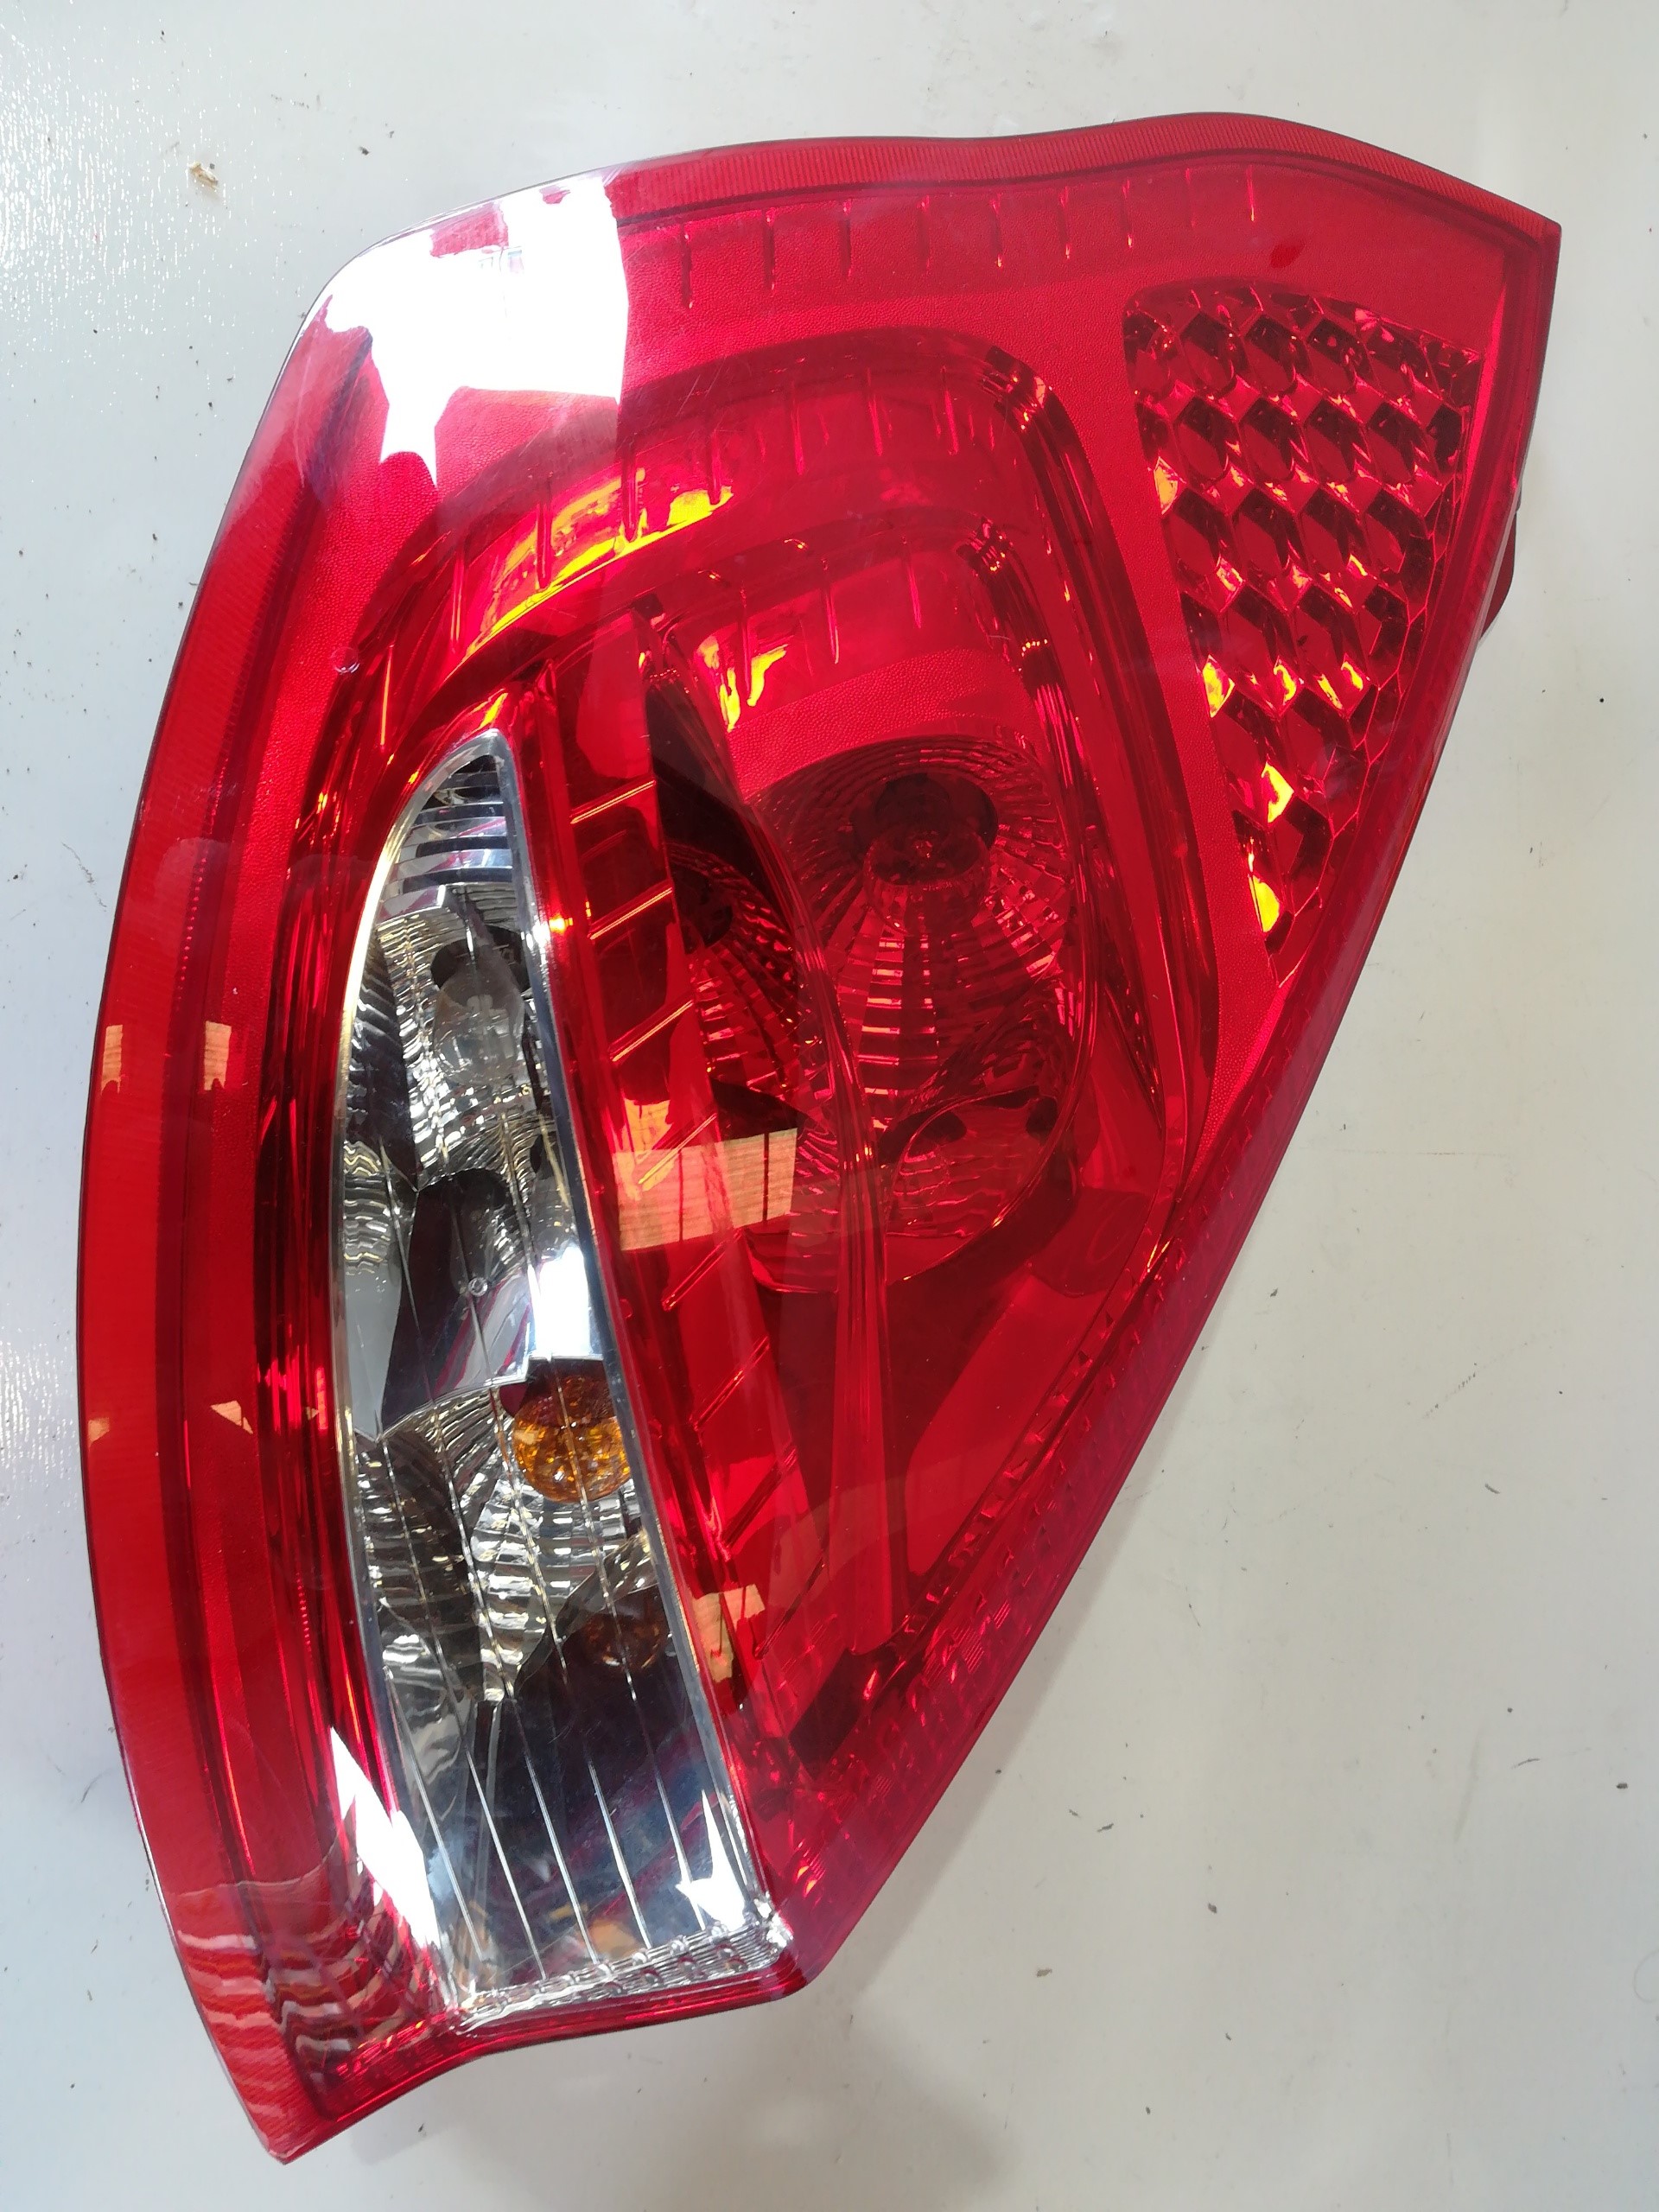 FORD Fiesta 5 generation (2001-2010) Rear Left Taillight 8A6113405A, 5PINES 22388054